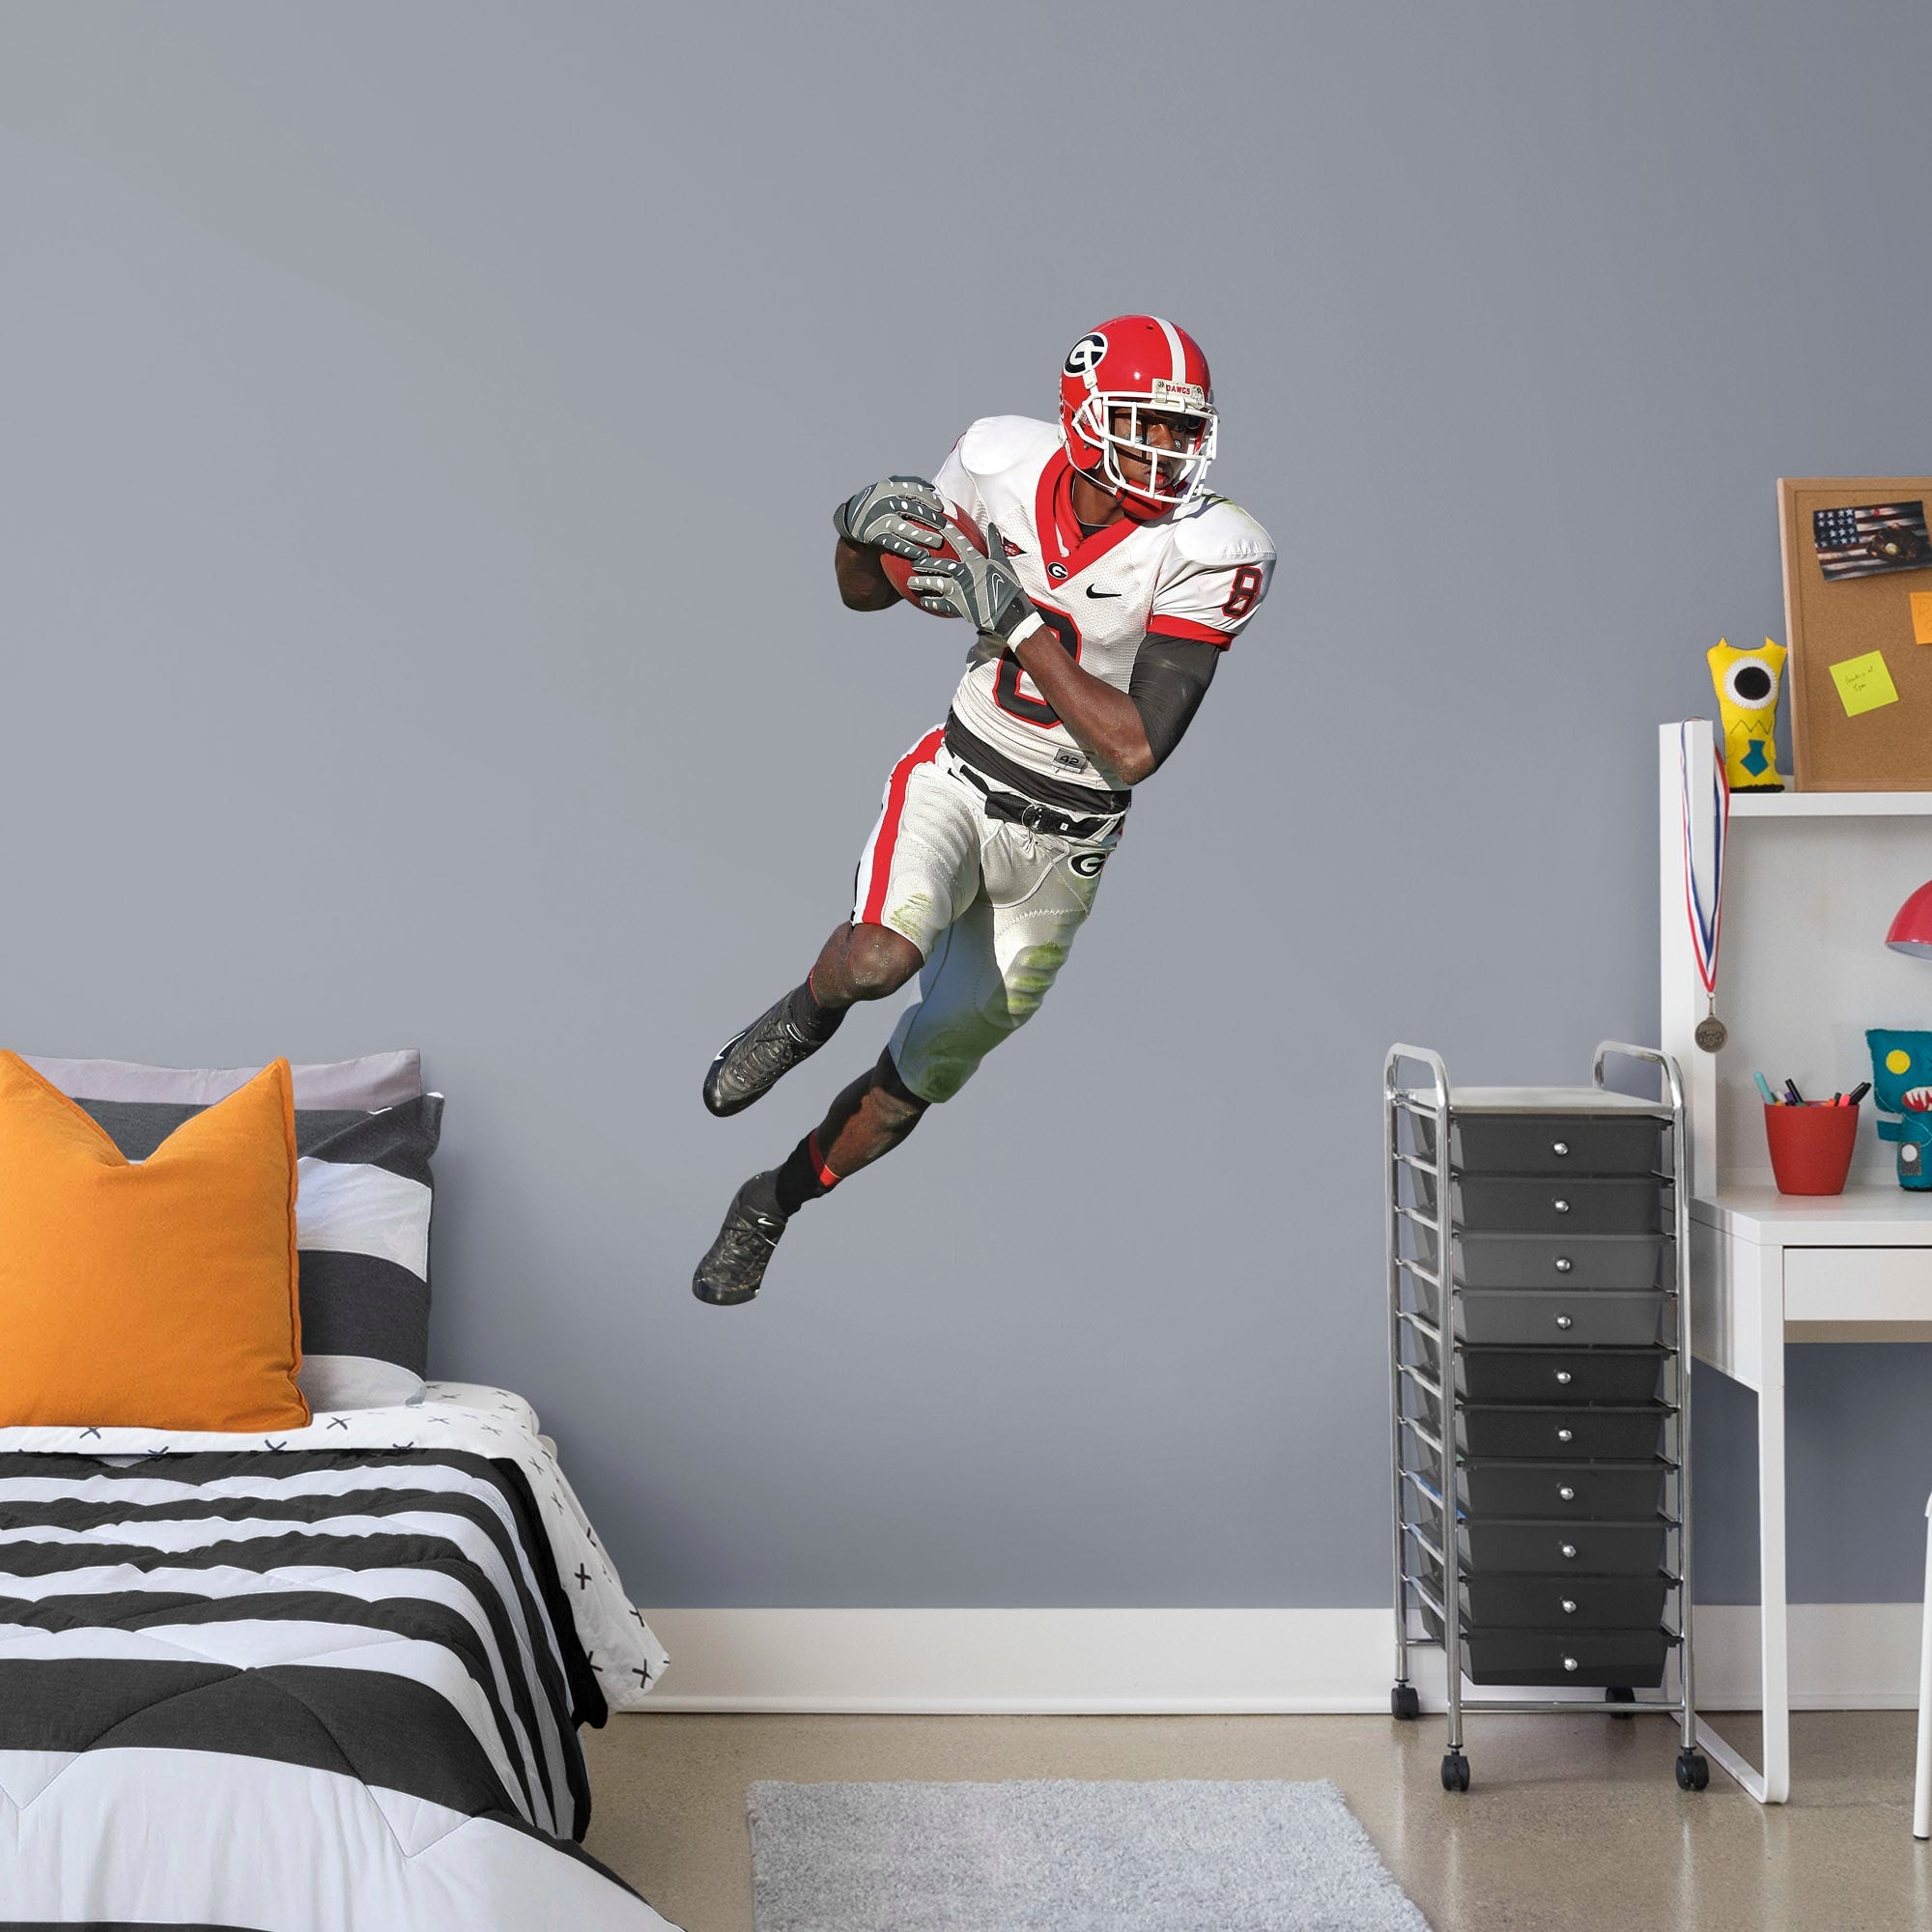 A.J. Green for Georgia Bulldogs: Georgia - Officially Licensed Removable Wall Decal Giant Athlete + 2 Decals (30"W x 51"H) by Fa